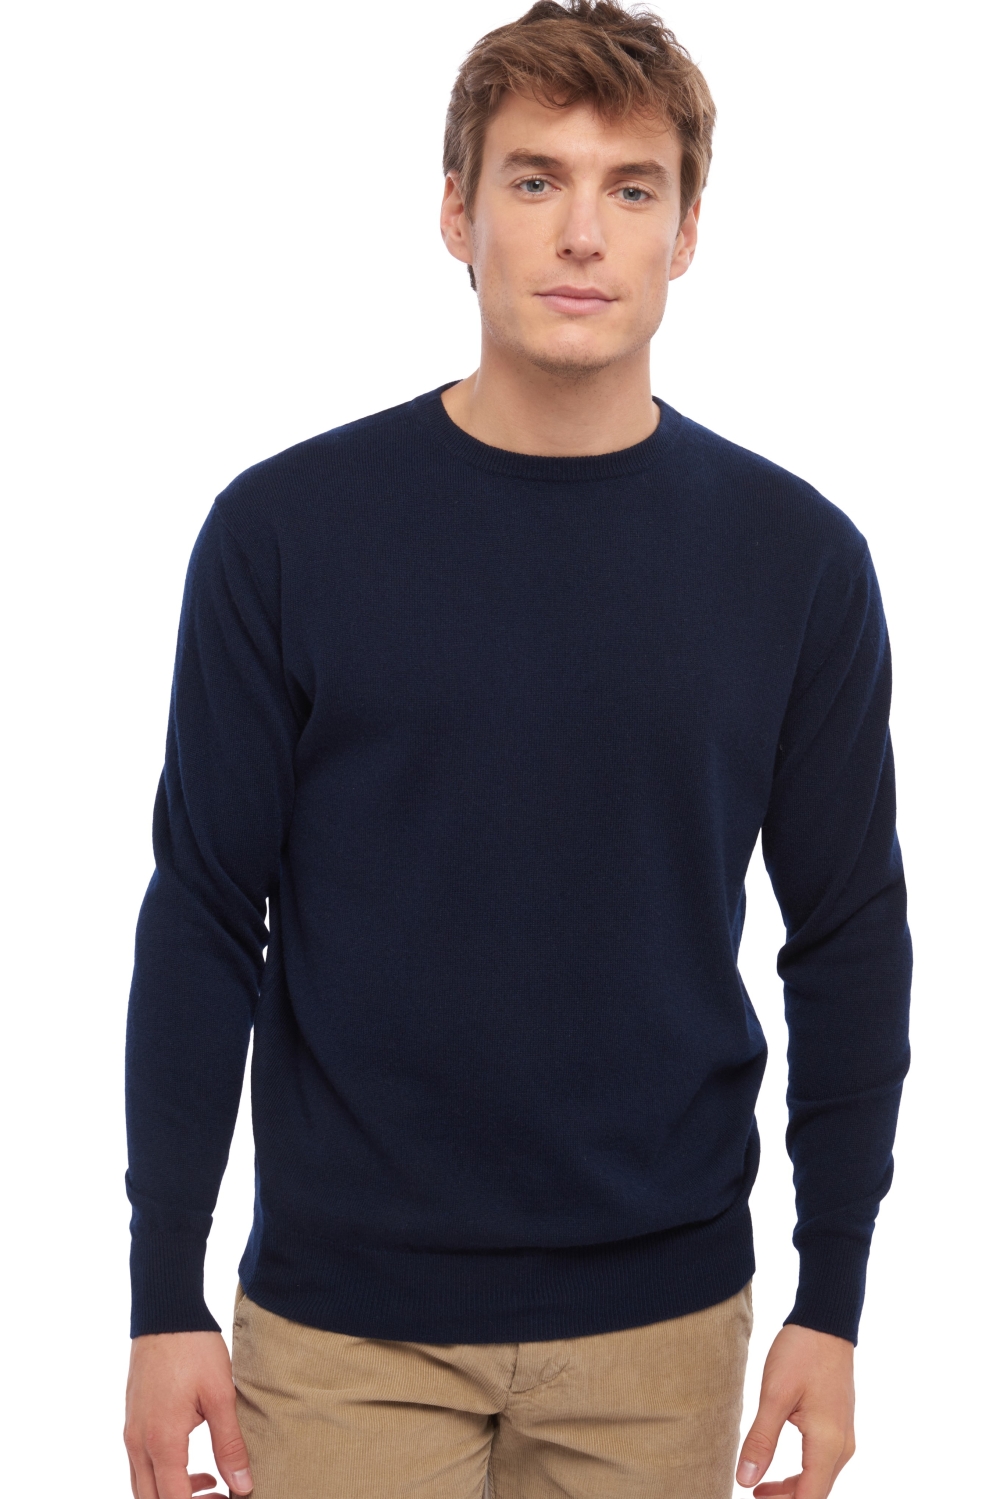 Cachemire pull homme col rond nestor marine fonce s